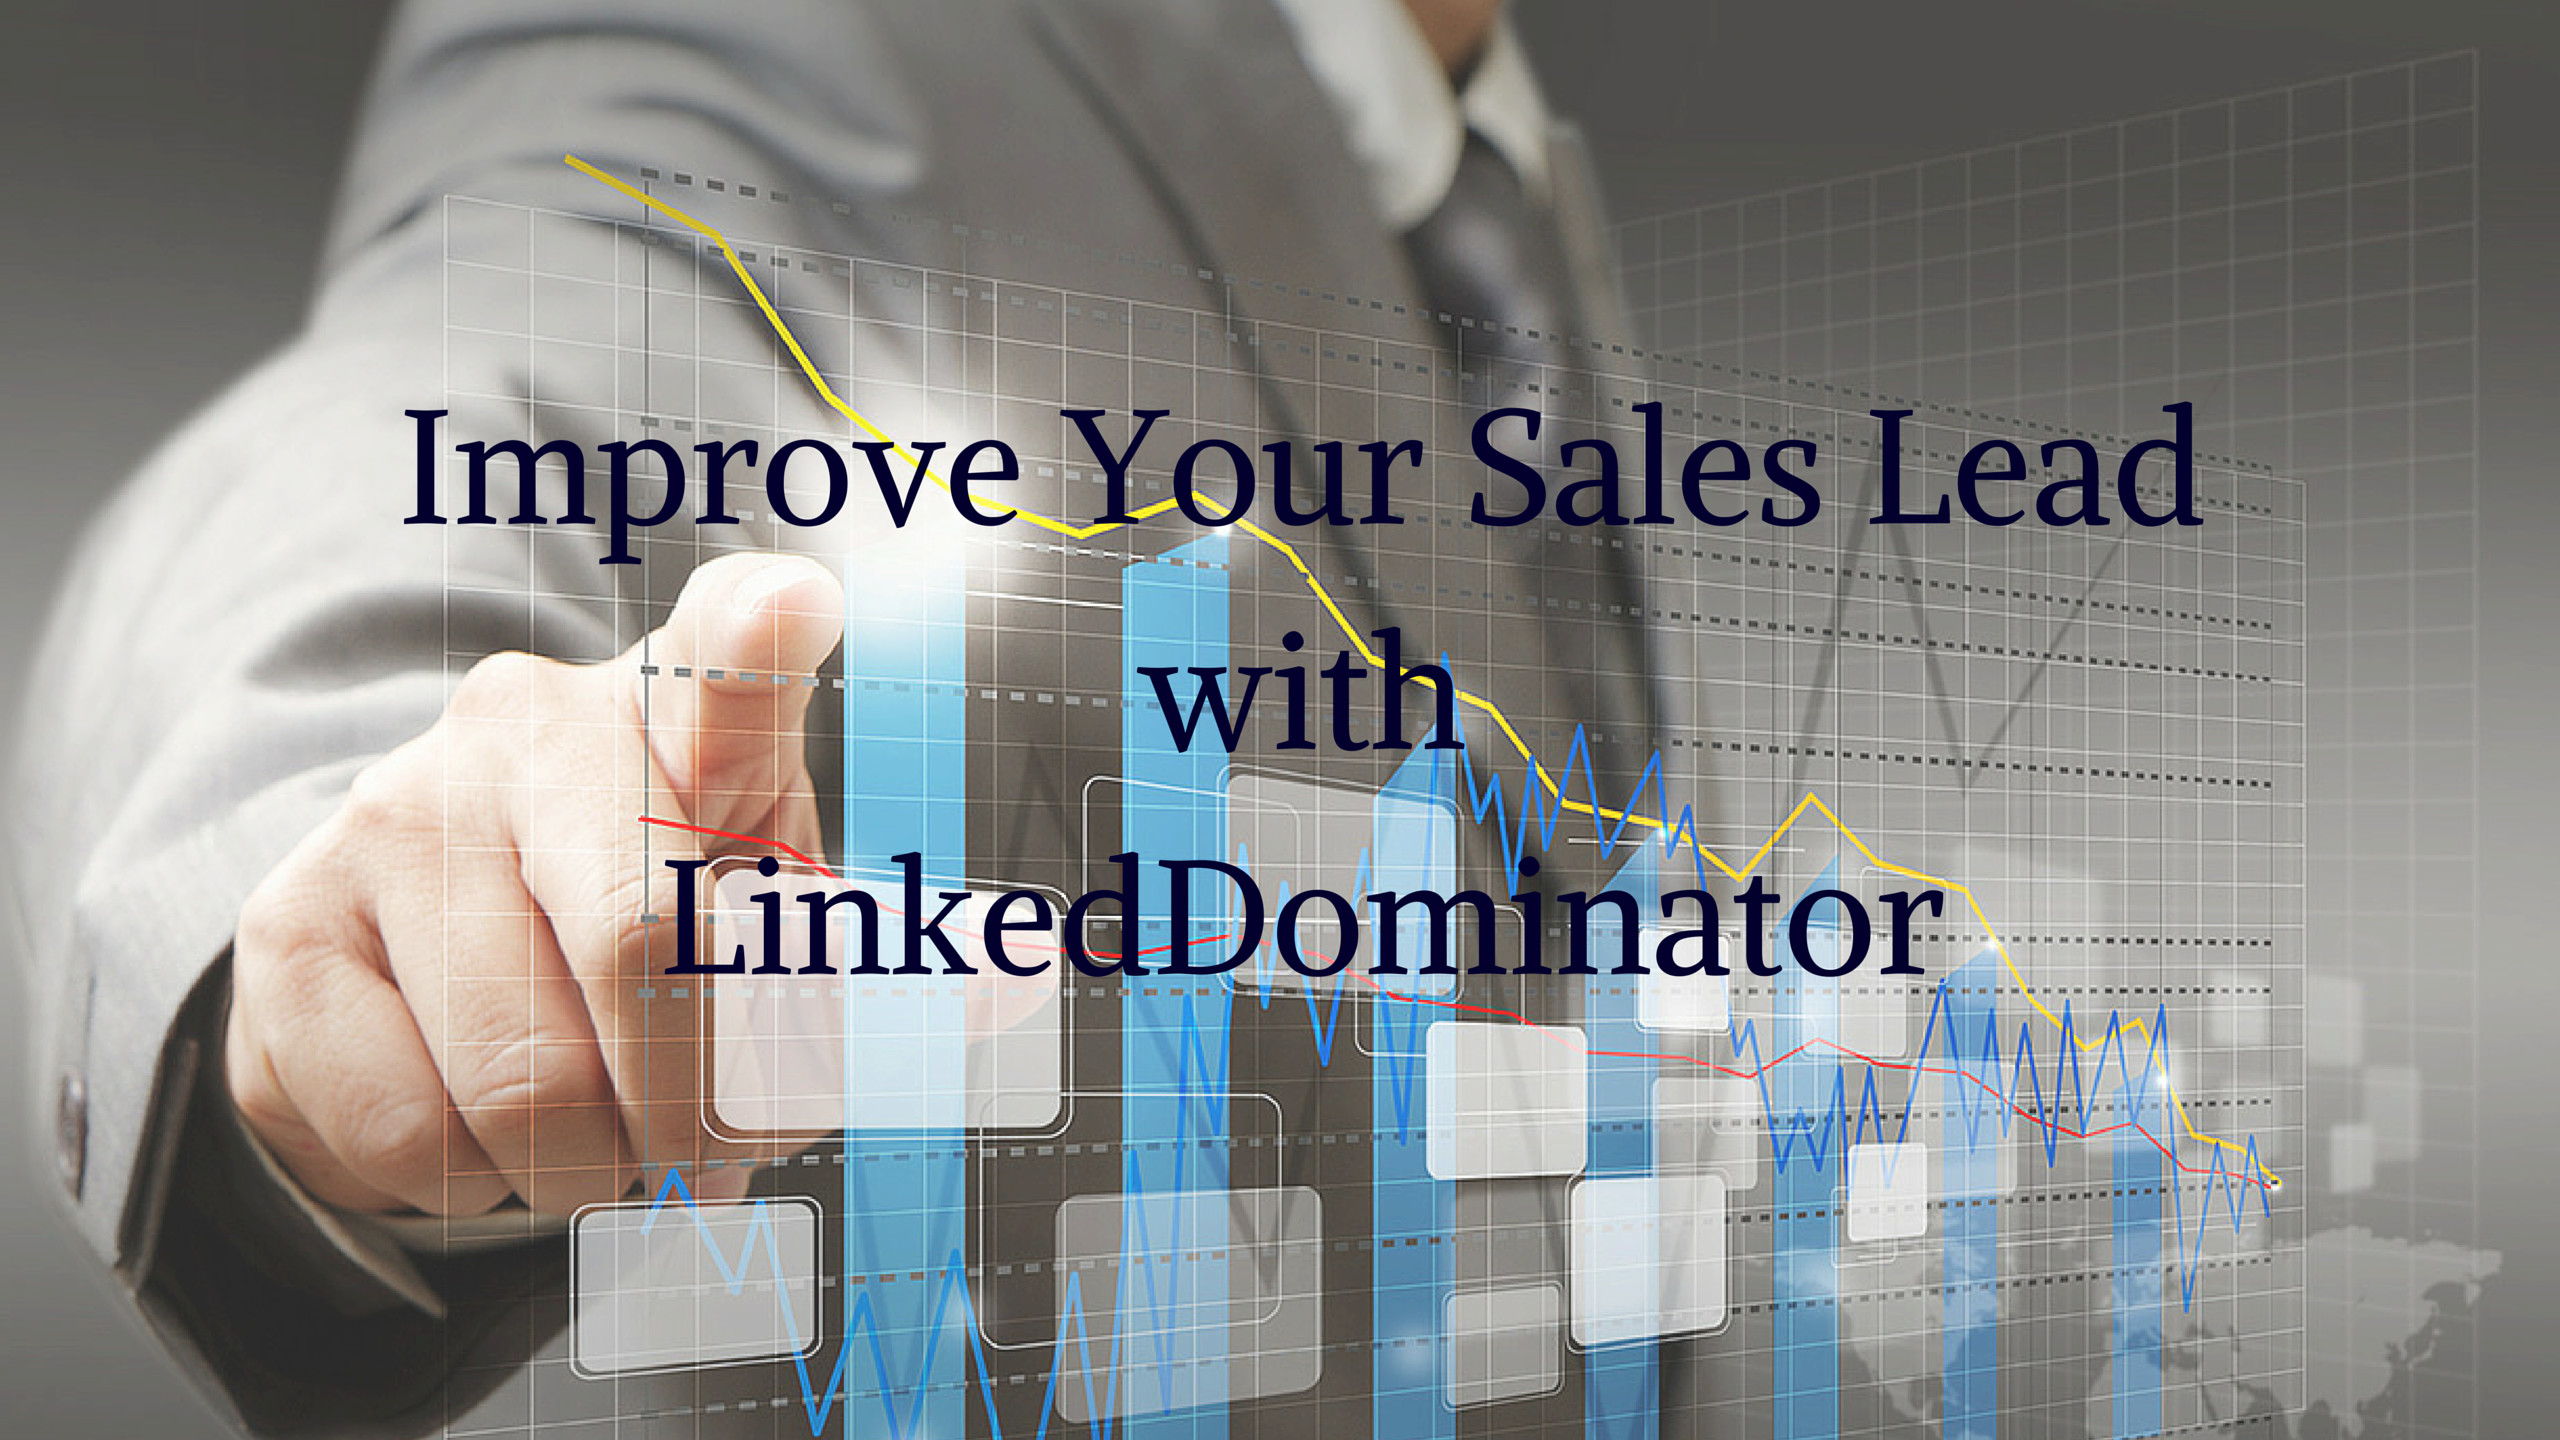 2560x1440 How a Financial Company Increases 81% Sales Lead Using LinkedDominator?